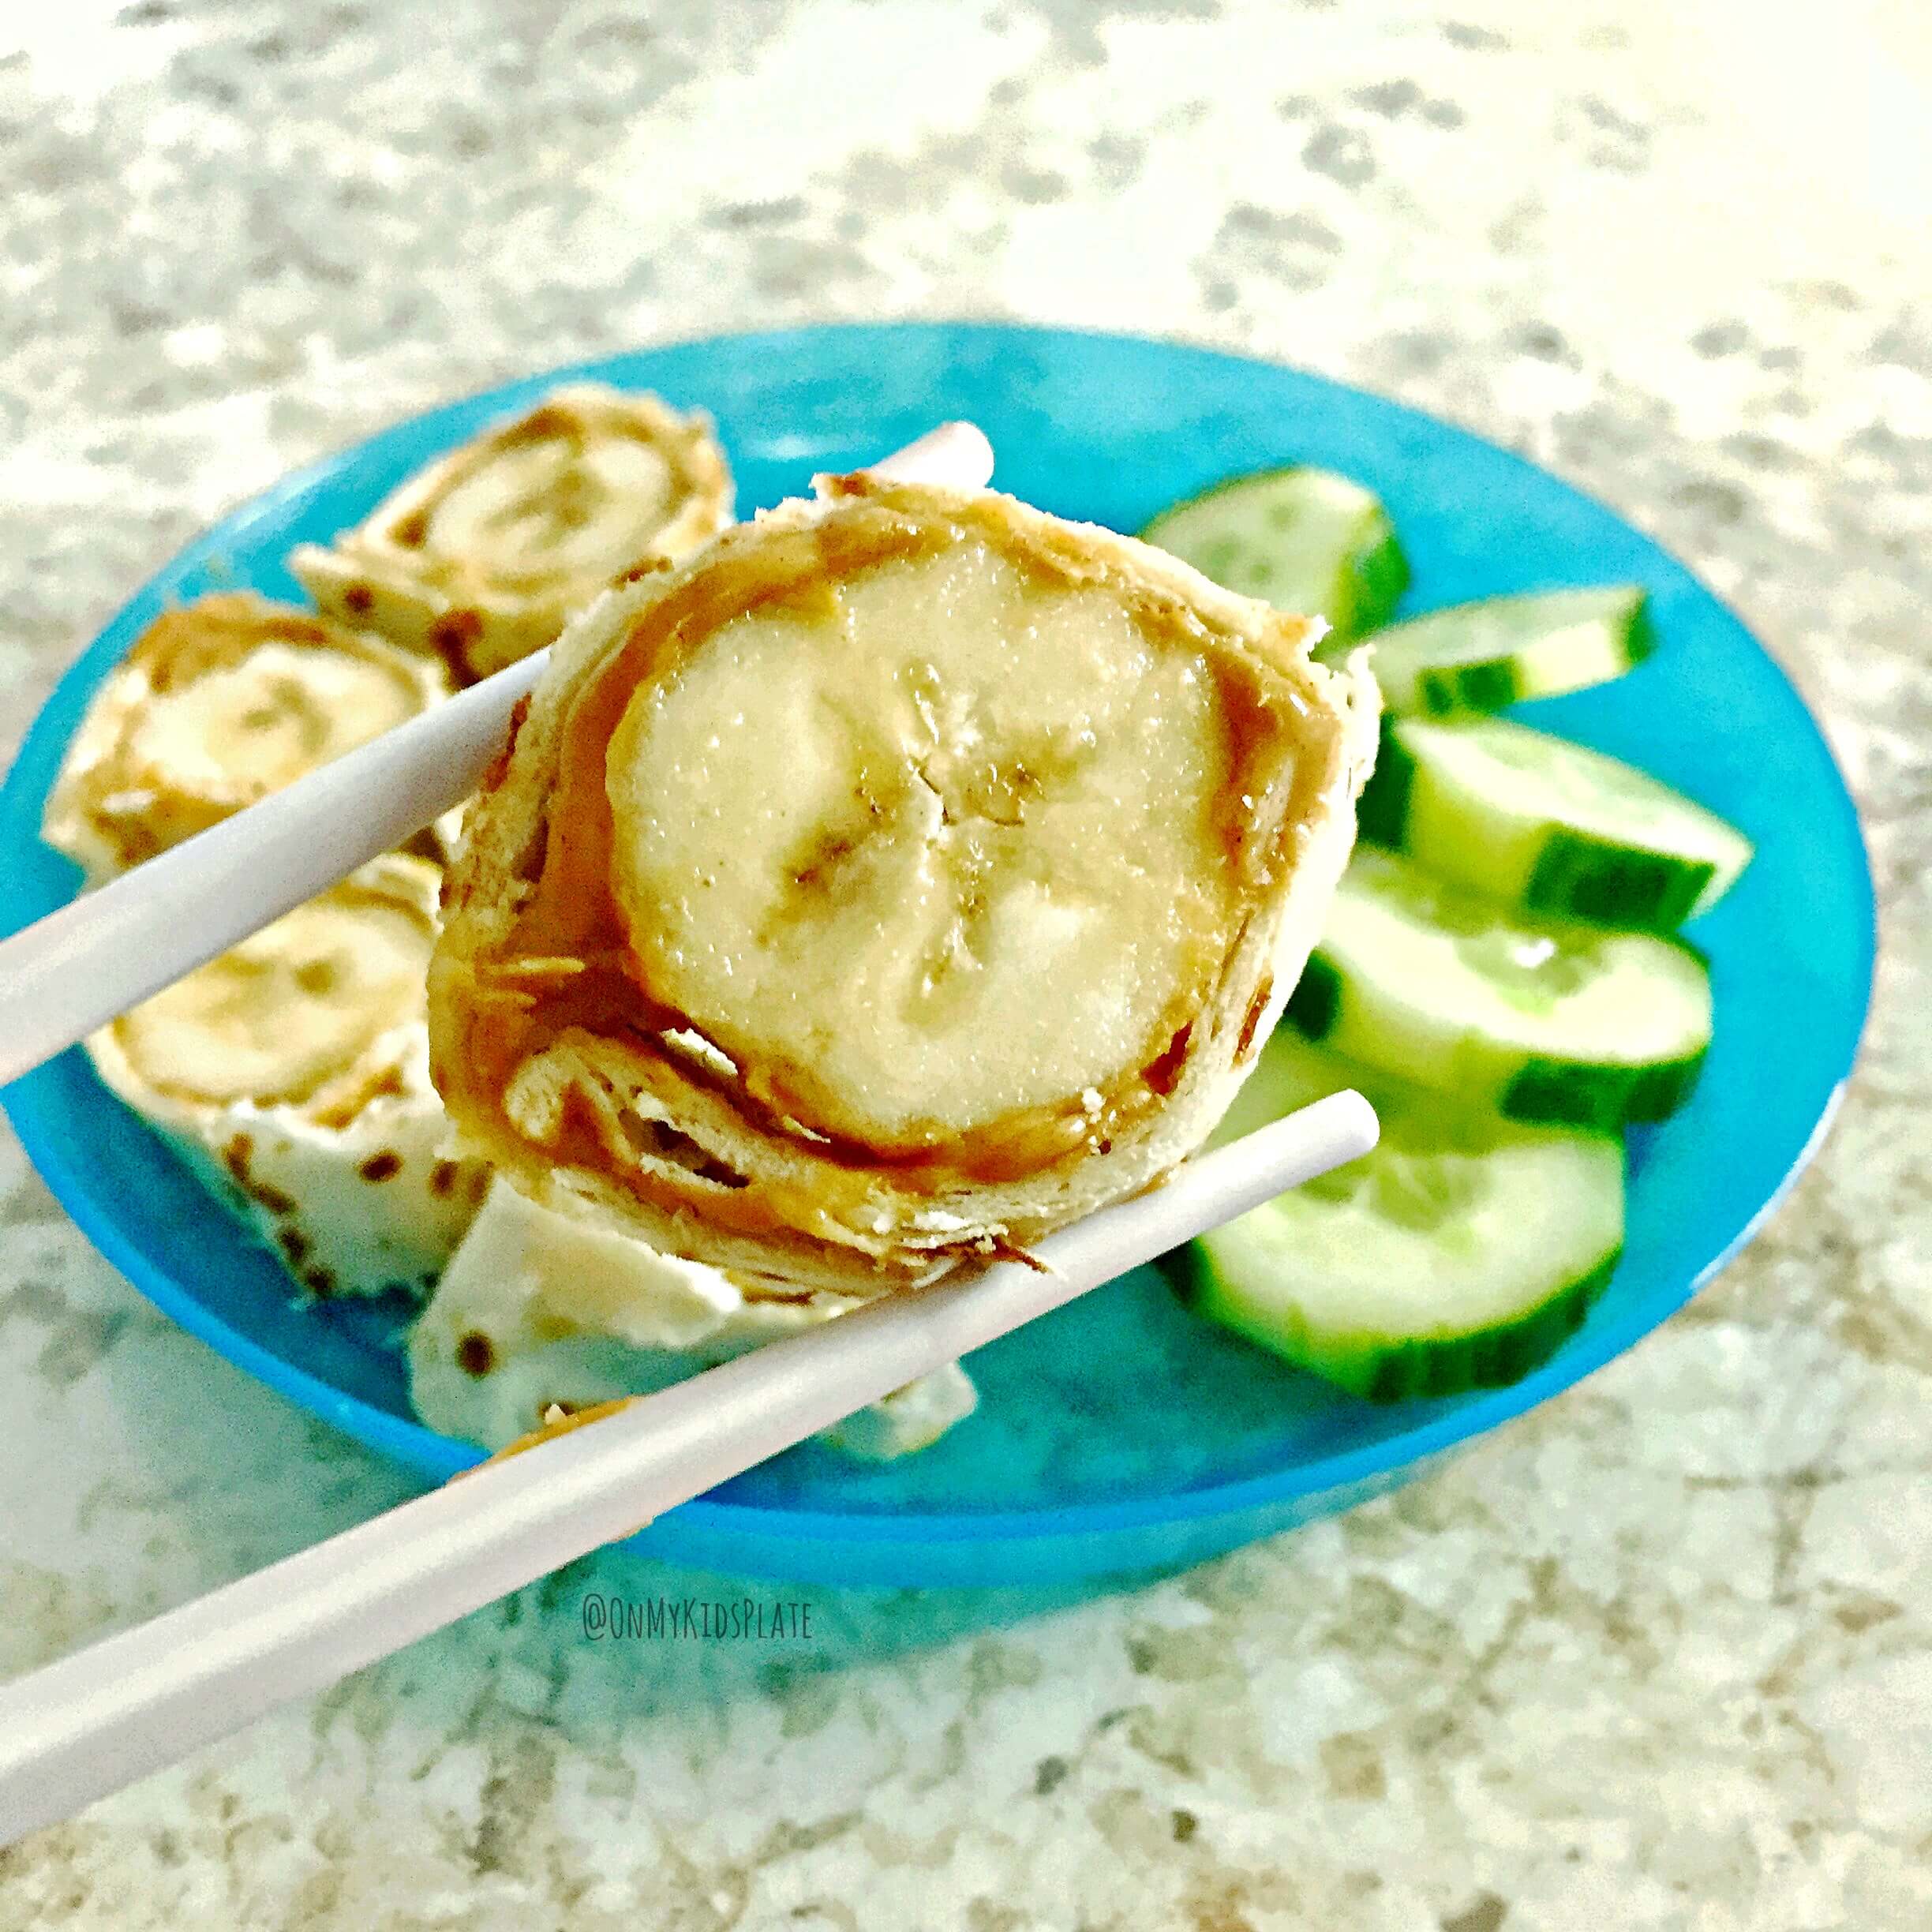 We see a close up of a blue kid's plate as it sits on a kitchen counter full of banana wrapped in a tortilla with a peanubutter inside wrapped and sliced into round pieces of babana sushi. A pair of chopsticks holds one slice of banana sushi up for a close look. A side of sliced cucumbers are stacked as a side ont he plate for a quick snack. 